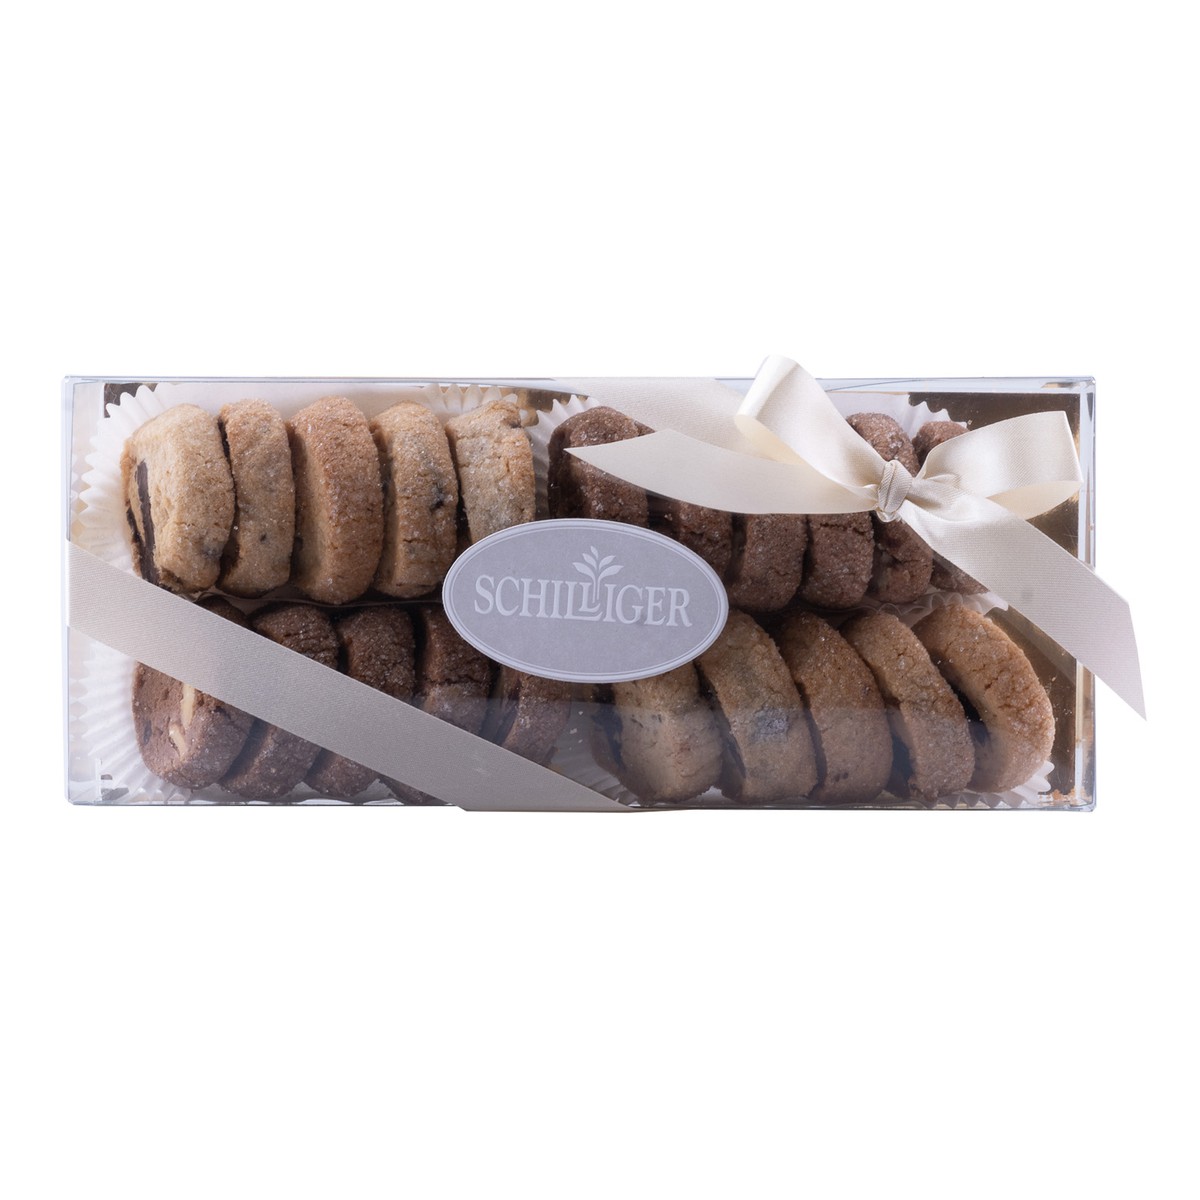 Biscuits Time
Biscuits Time  Etui sablés au chocolat  180gr